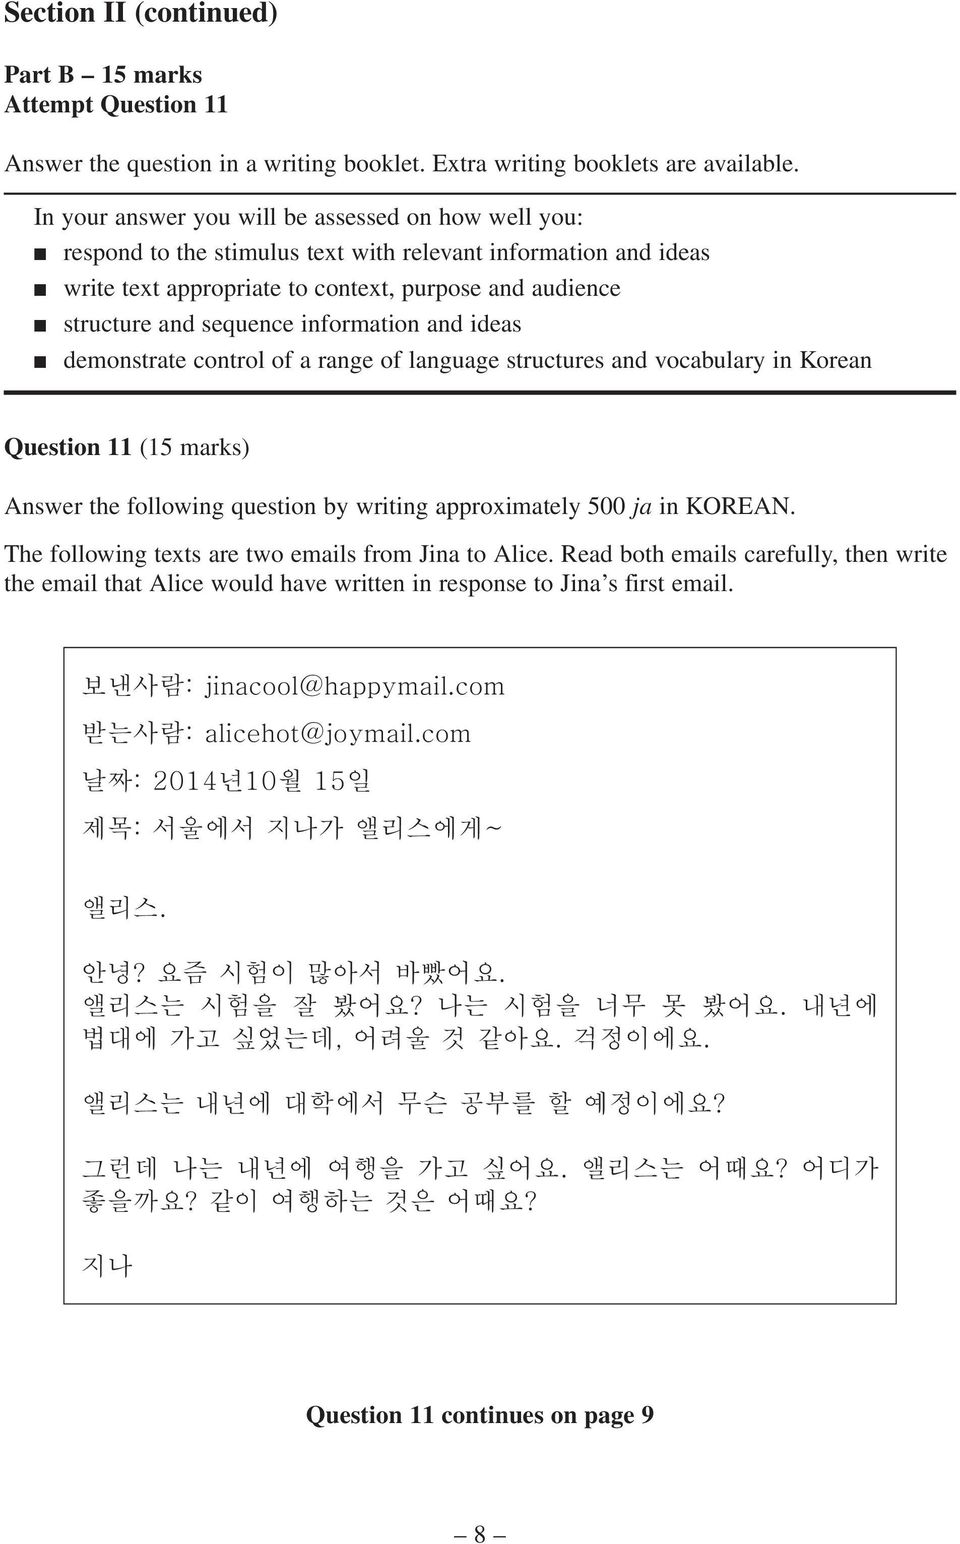 information and ideas demonstrate control of a range of language structures and vocabulary in Korean Question 11 (15 marks) Answer the following question by writing approximately 500 ja in KOREAN.